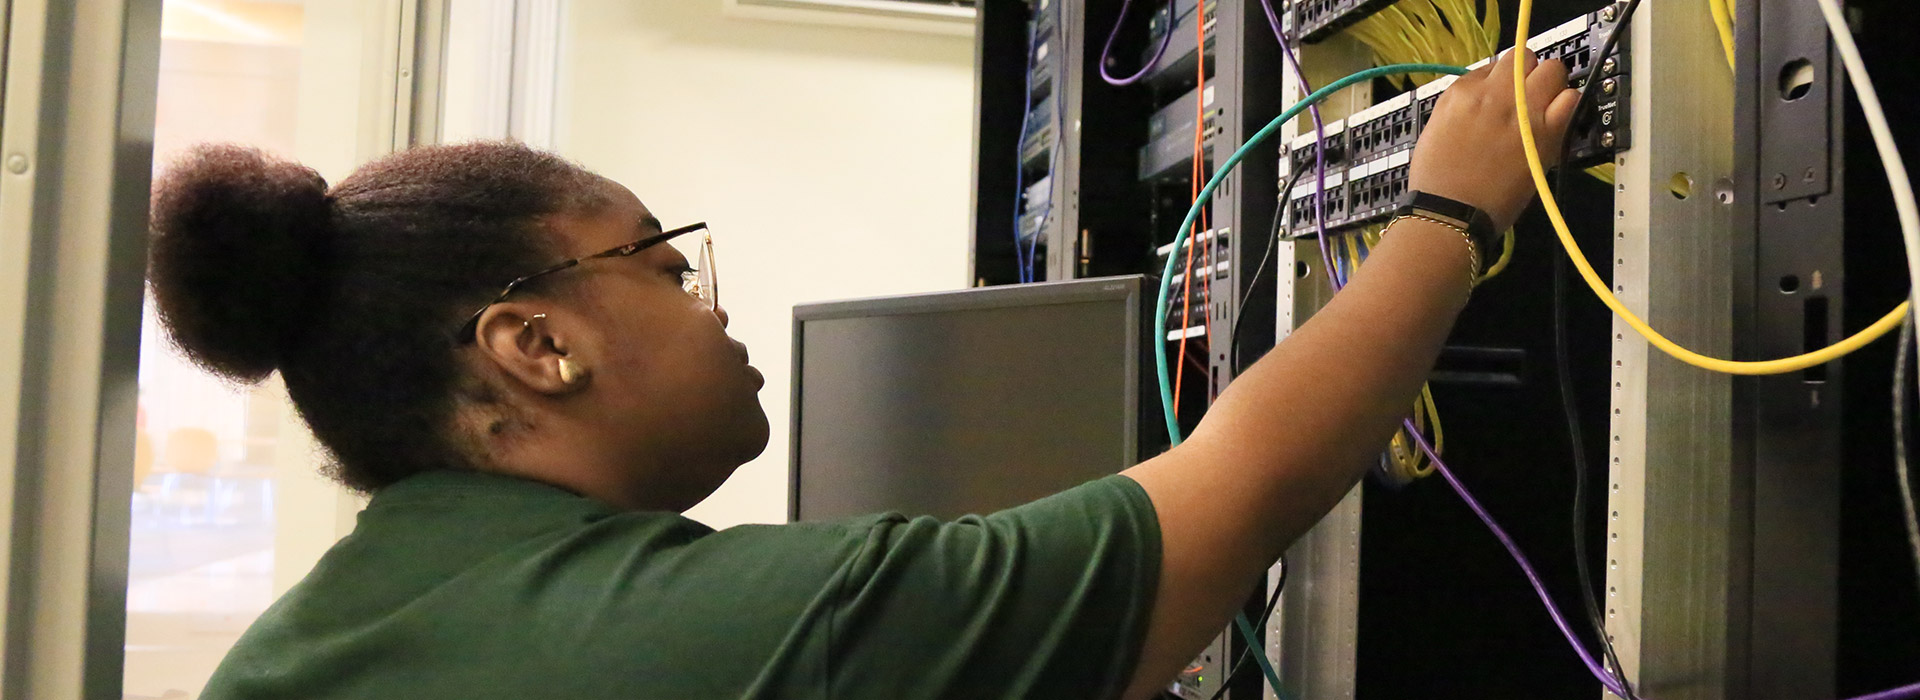 A student works on servers in the networking lab